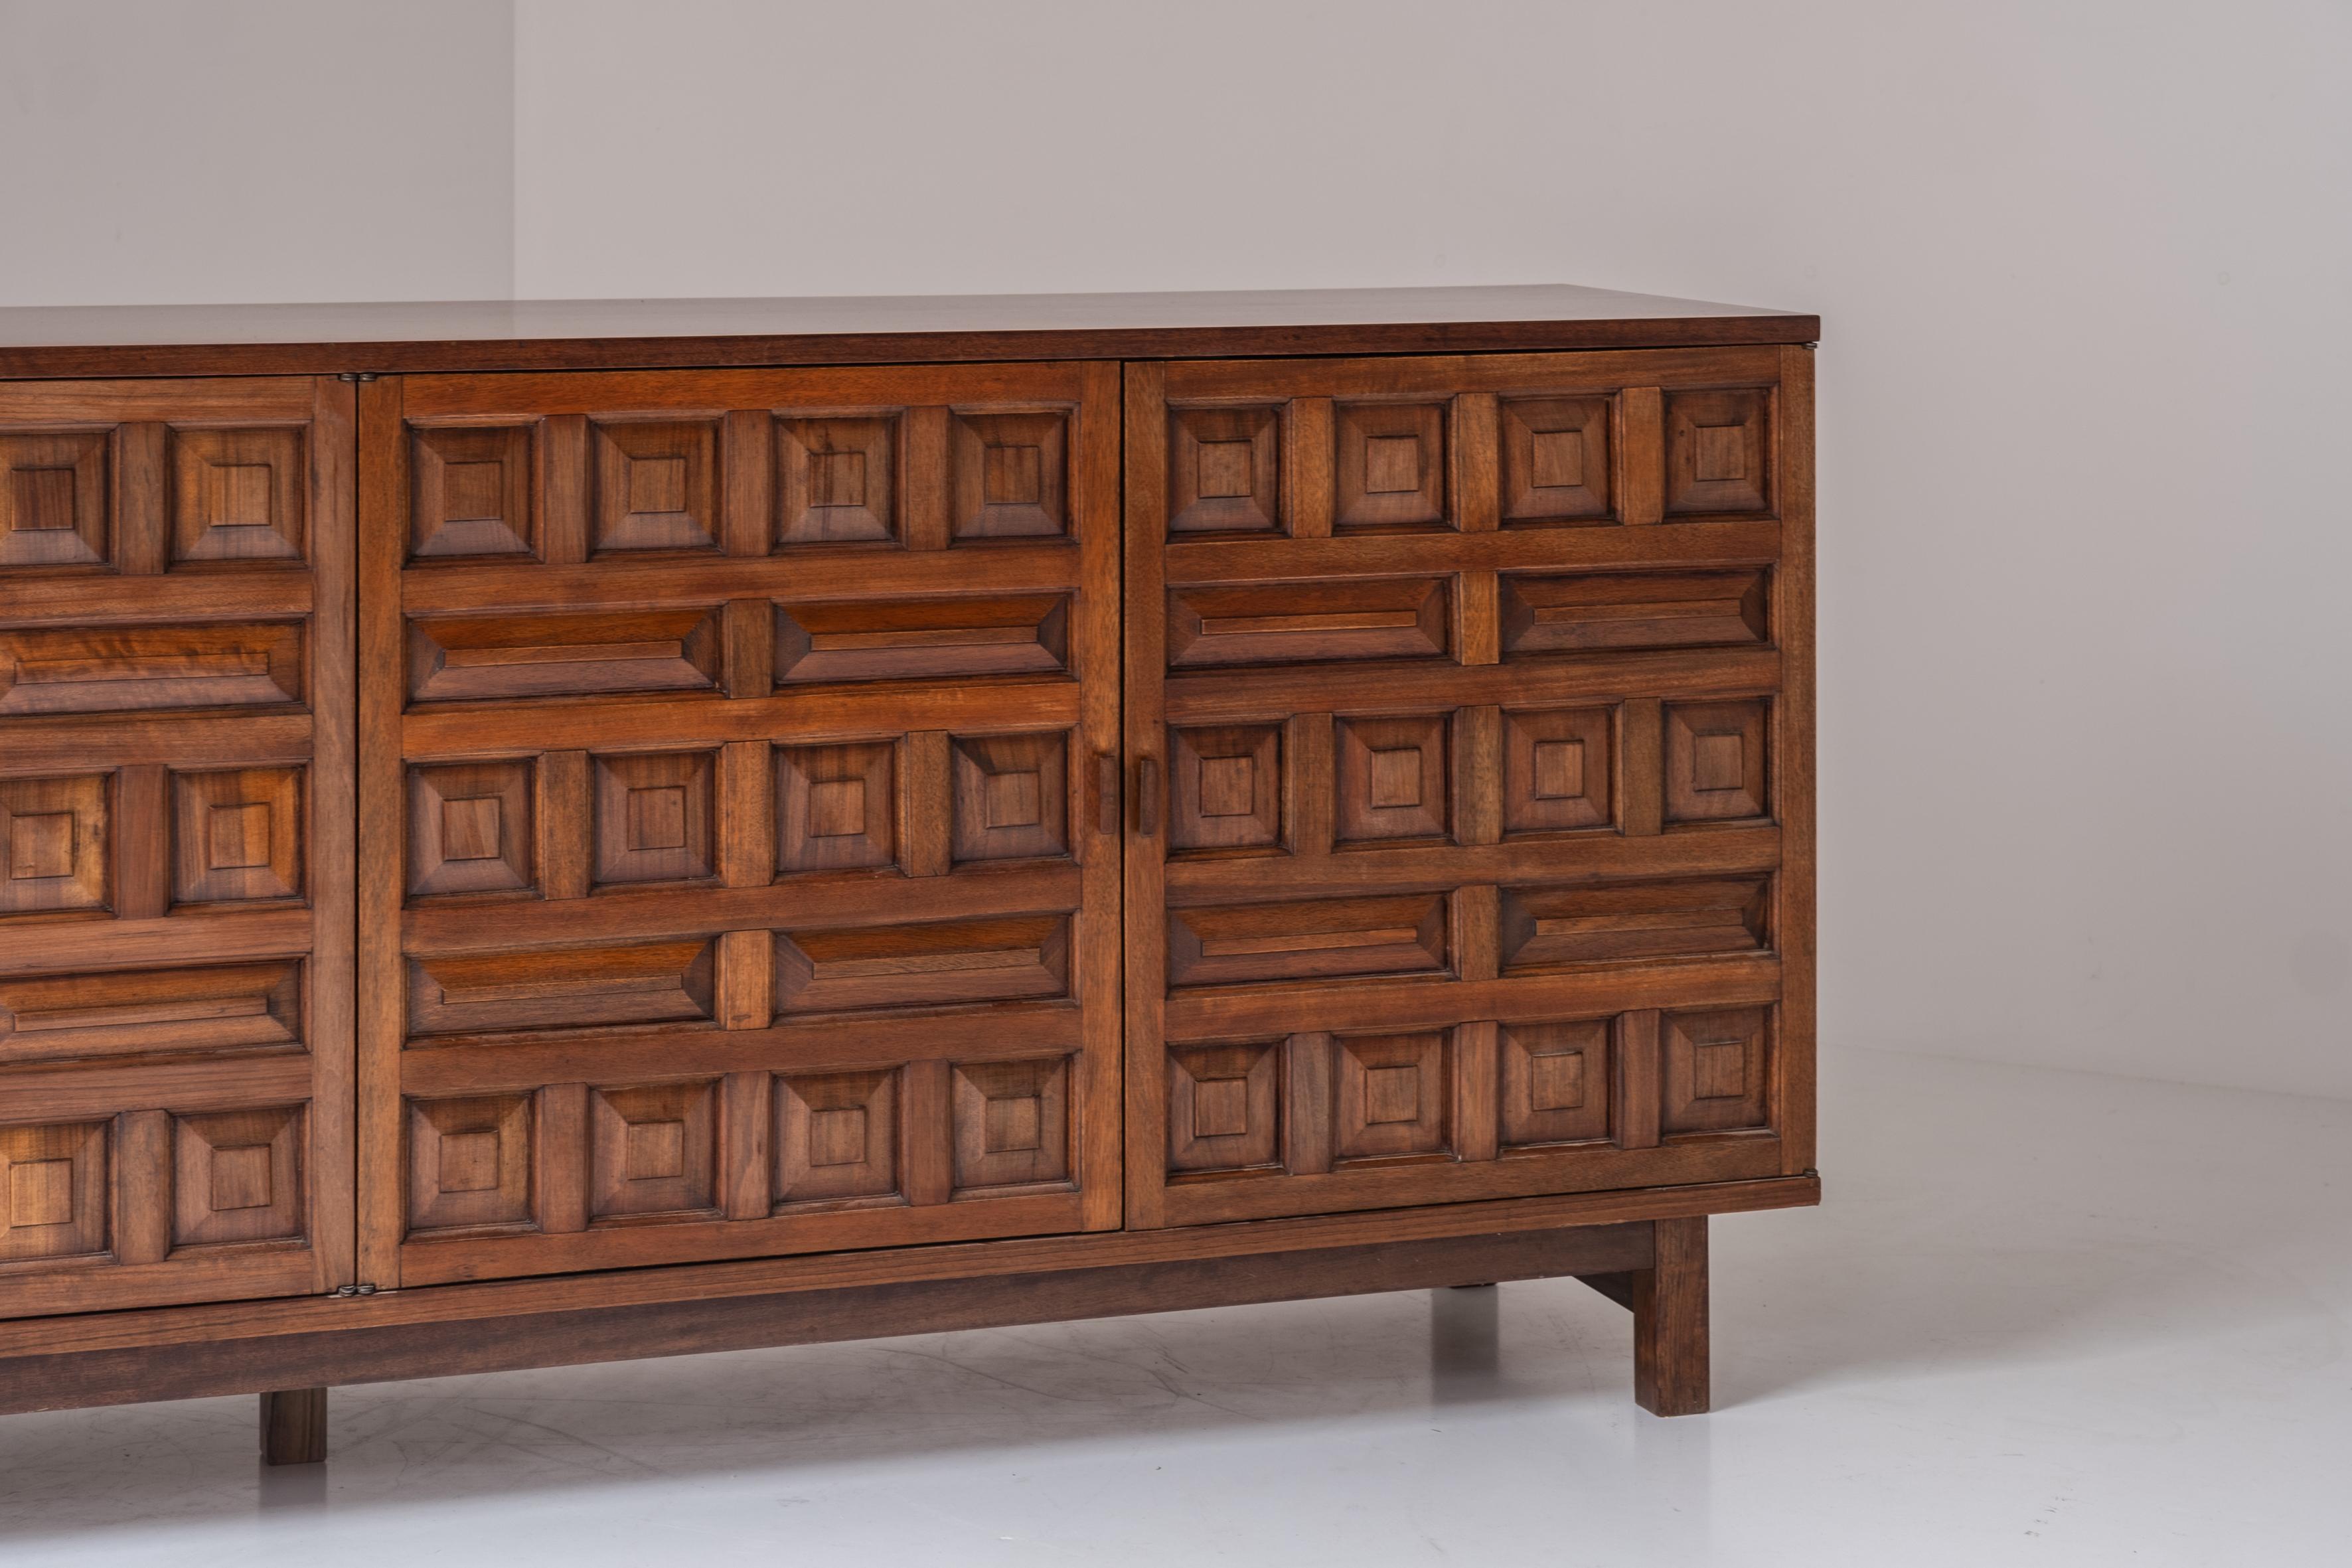 Walnut Brutalist sideboard from Spain, designed and manufactured in the 1970s.